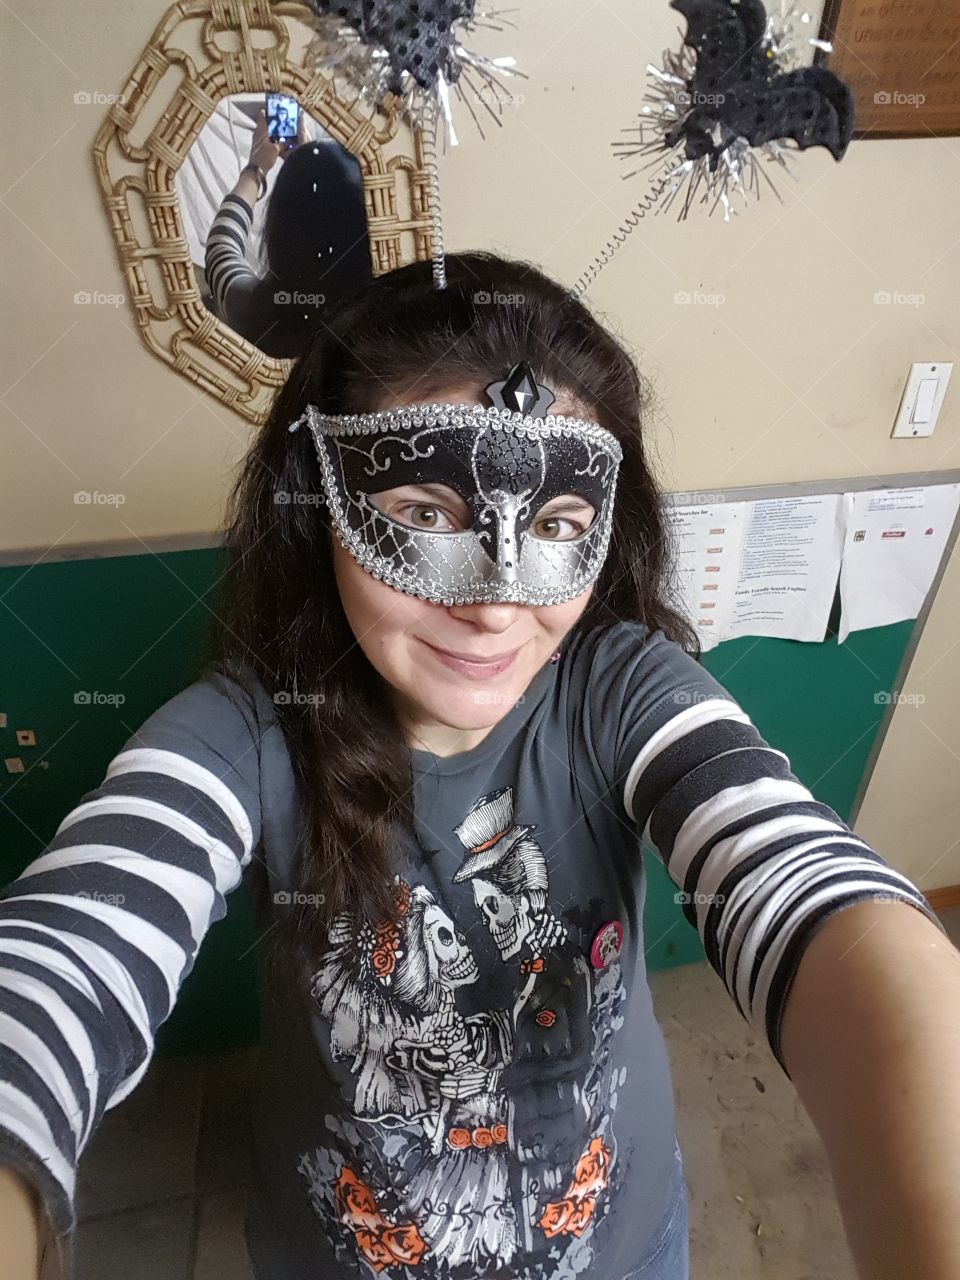 This is my costume. A mask with a batty headband and my long striped sleeve skeleton bride n groom shirt that glows in the dark. I'm also wearing skeleton earrings.